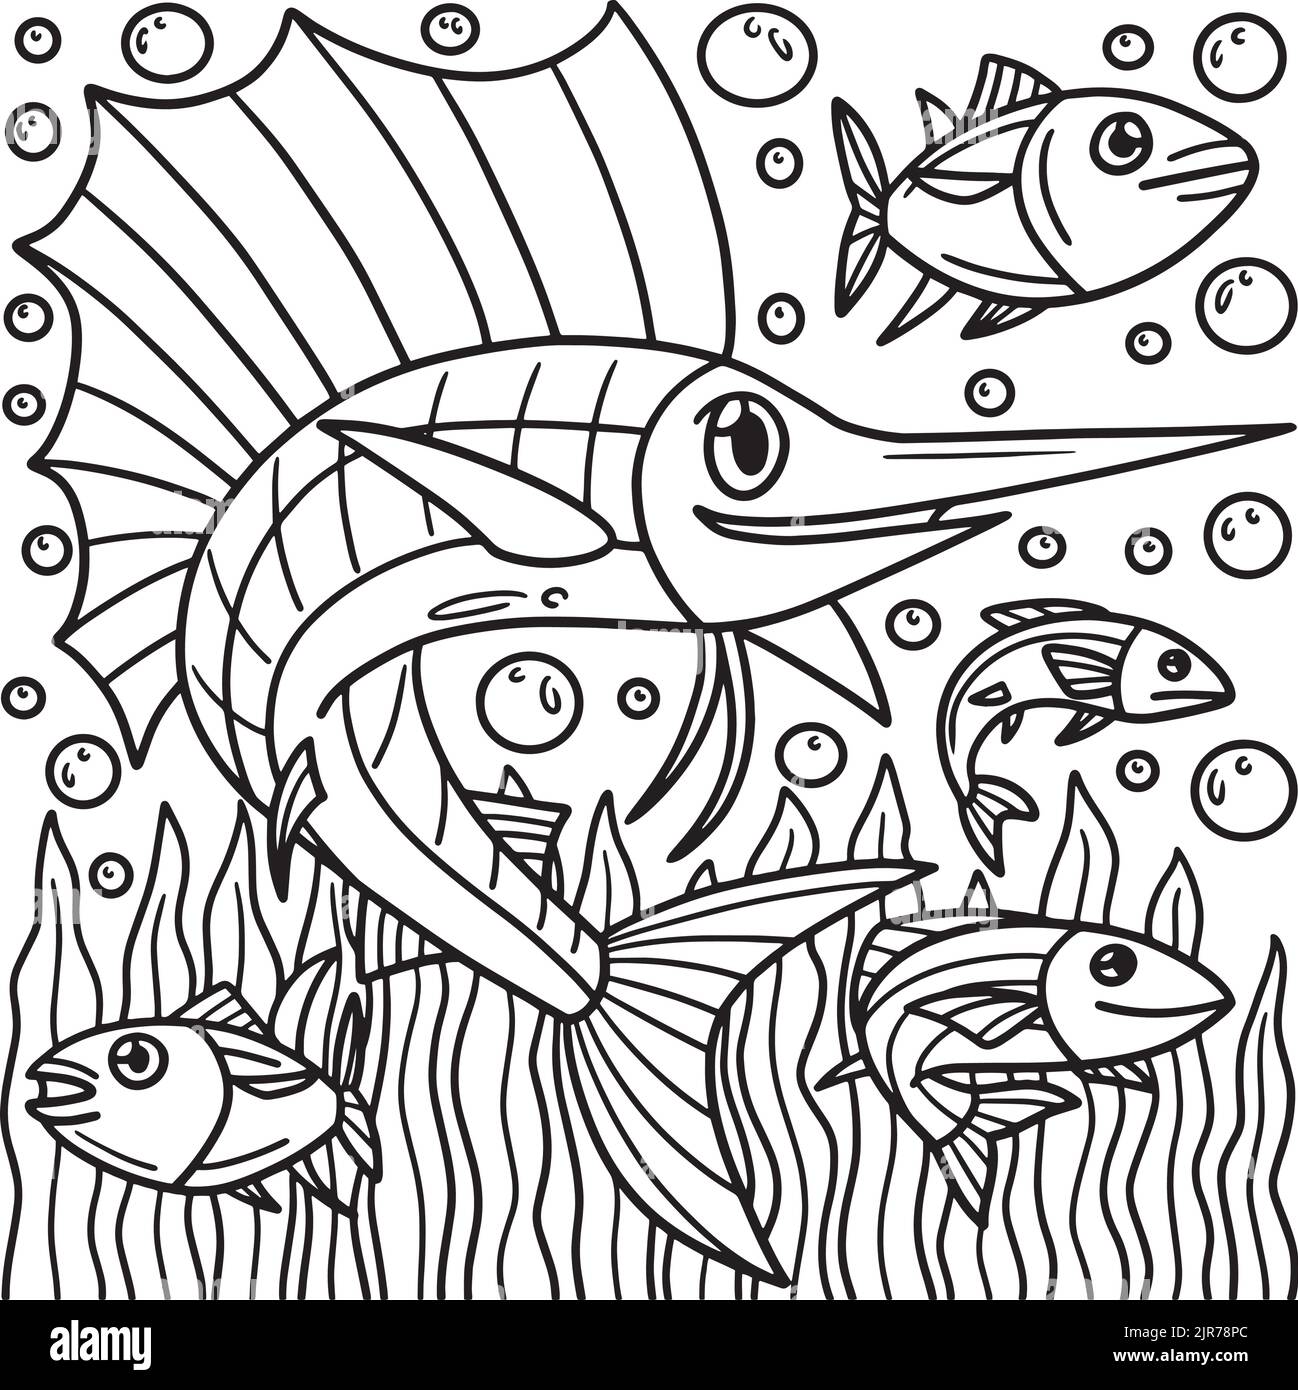 Sail Fish Coloring Page for Kids Stock Vector